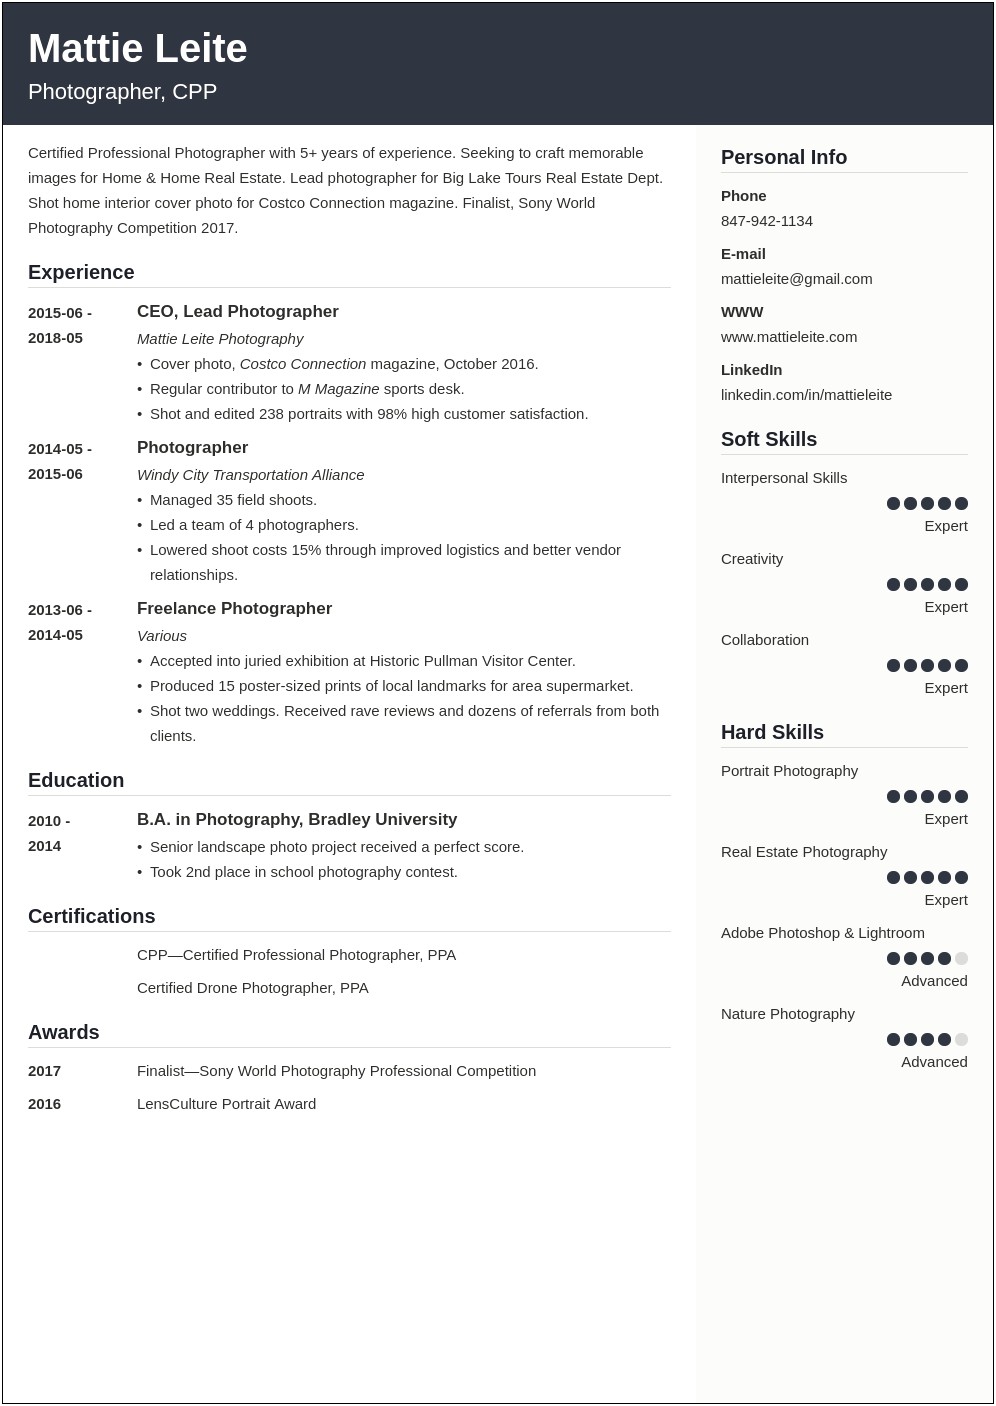 Sample Hr Resume Coming From Photographer